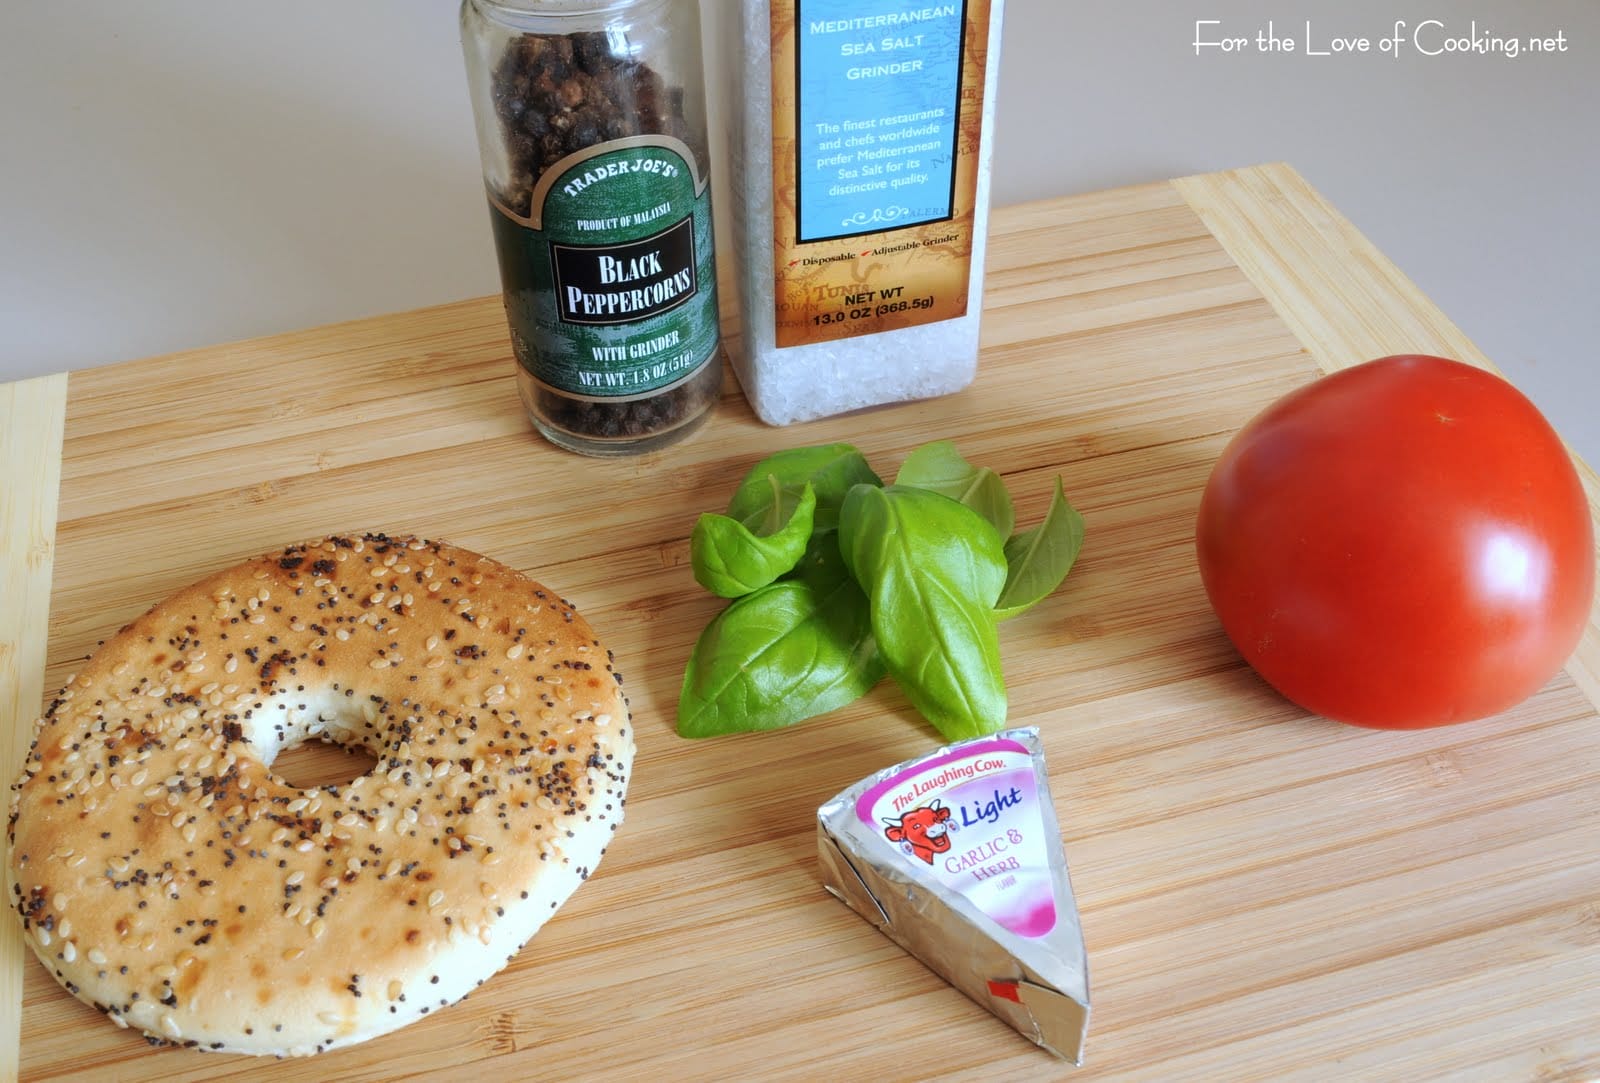 Tomato and Basil Sandwich with a Twist